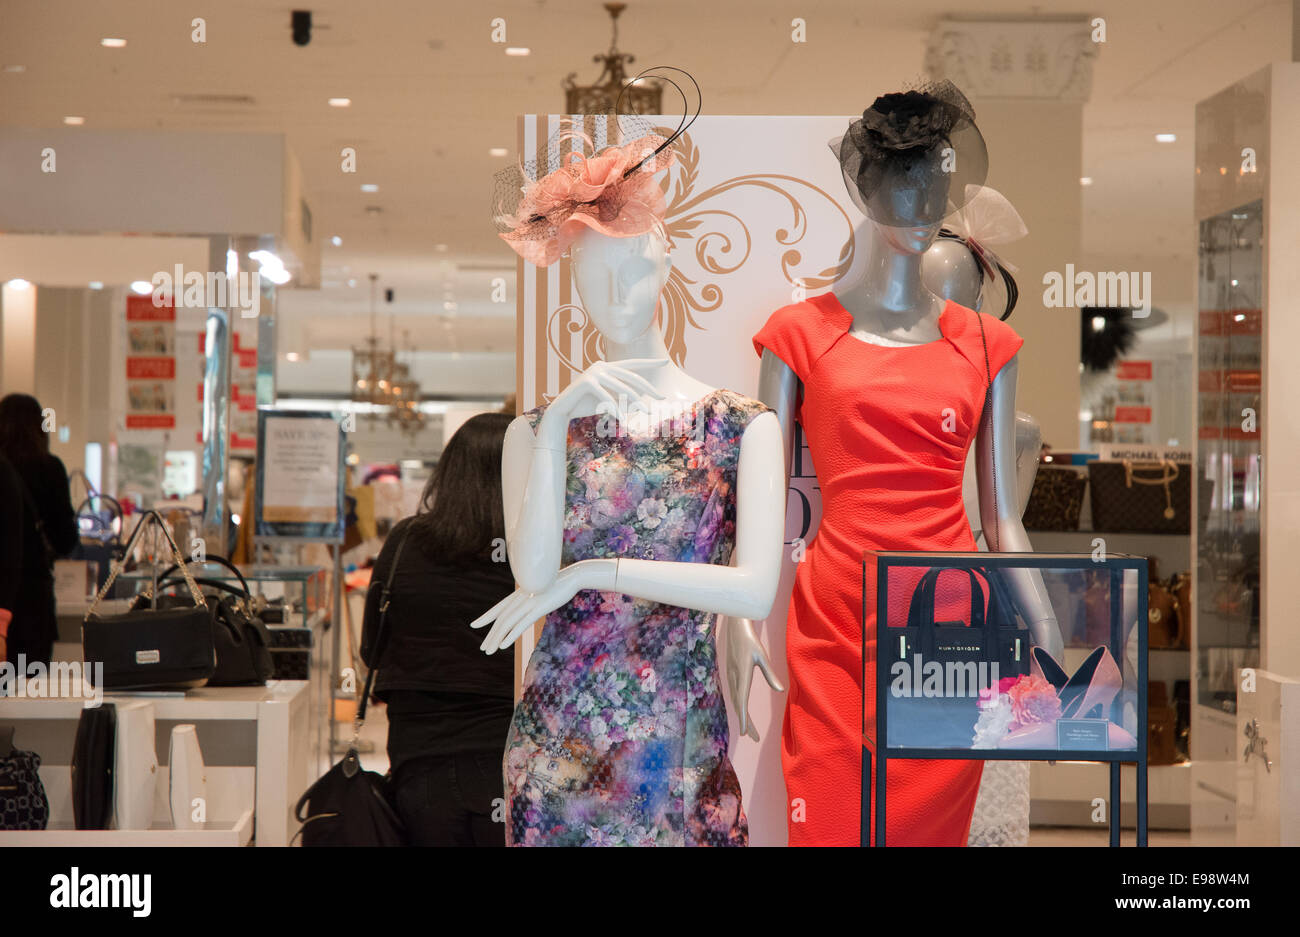 Mannequins In Retail Clothing Store Display Stock Photo